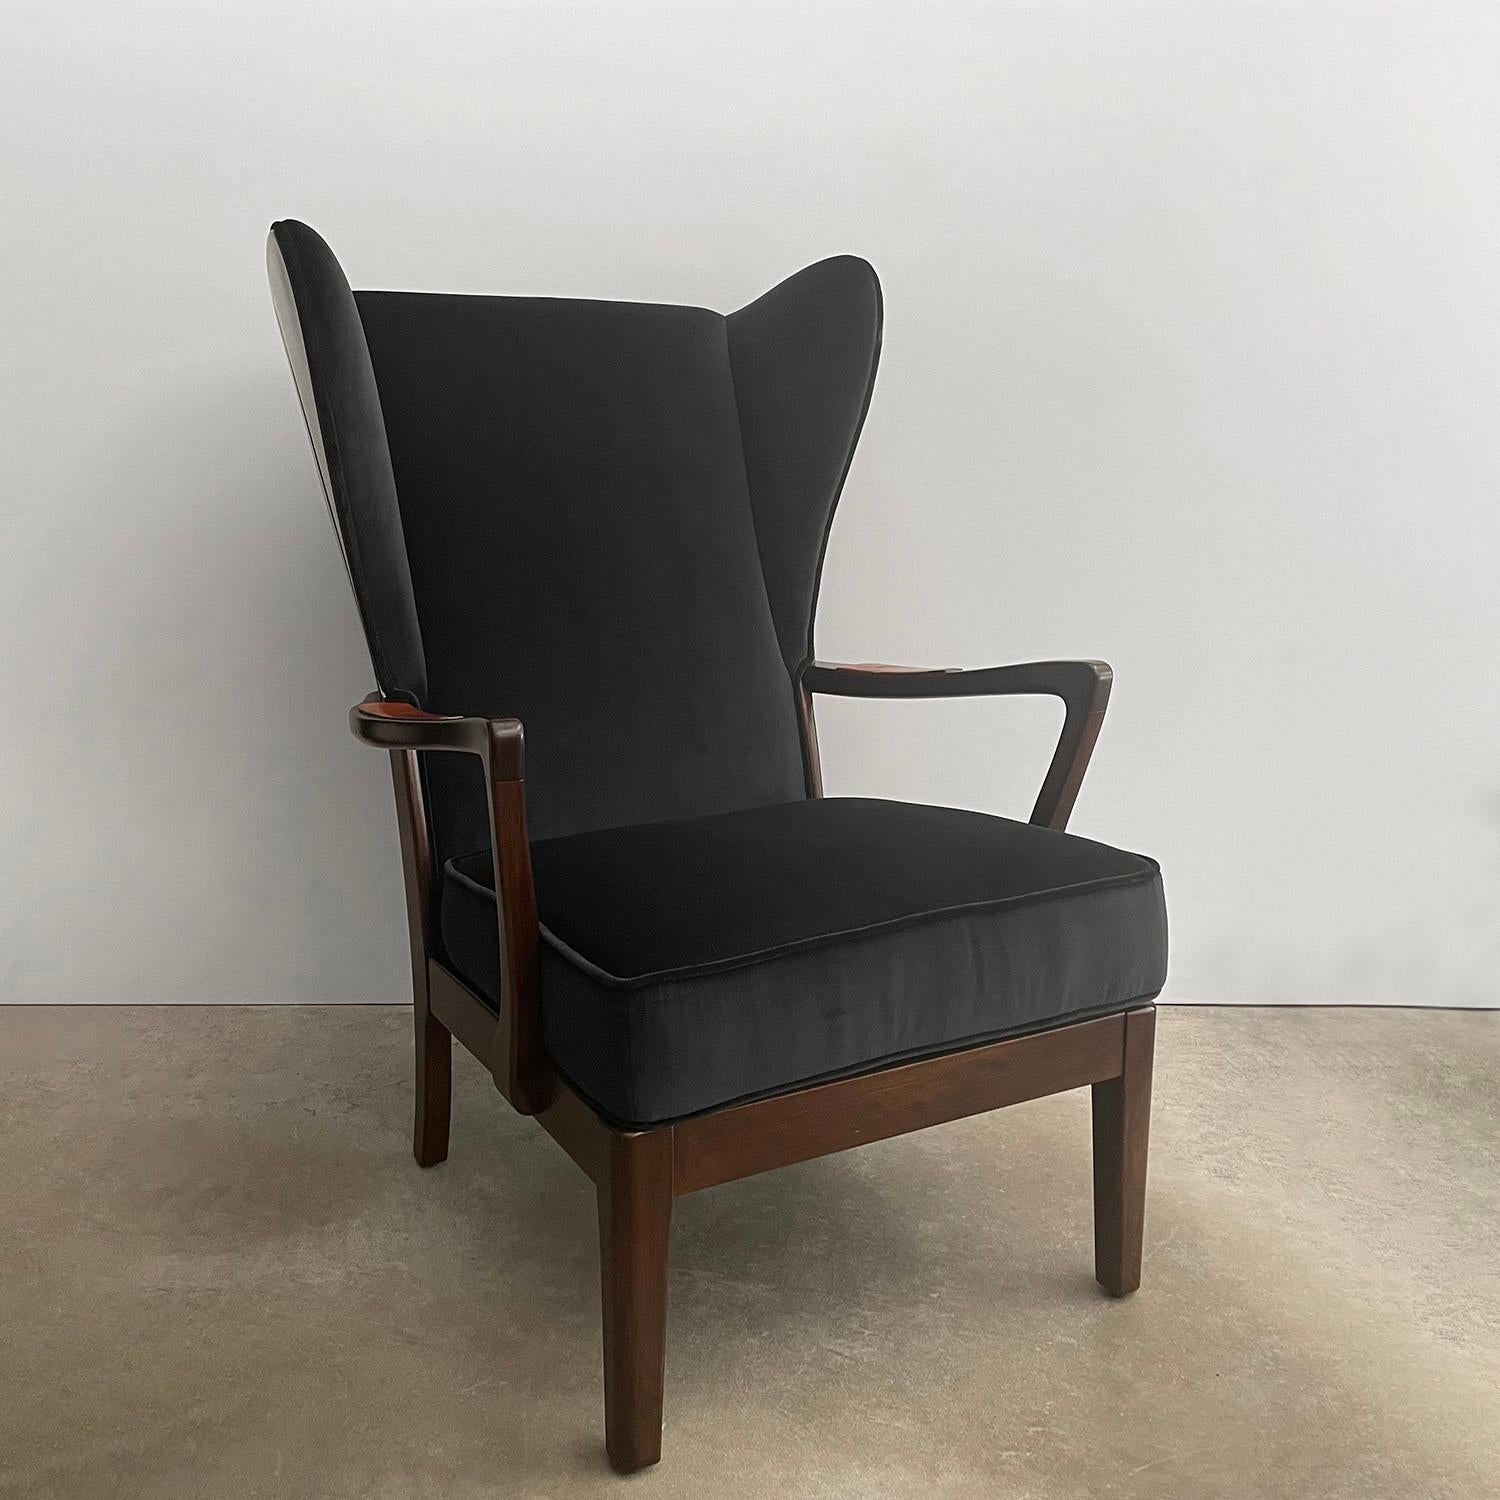 1940's Danish wingback lounge chair 
This handsome lounge chair has a distinguished and structured silhouette 
Newly refinished wood paneled frame accented with original leather hand rests 
Newly reupholstered in silky Italian velvet 
Patina from